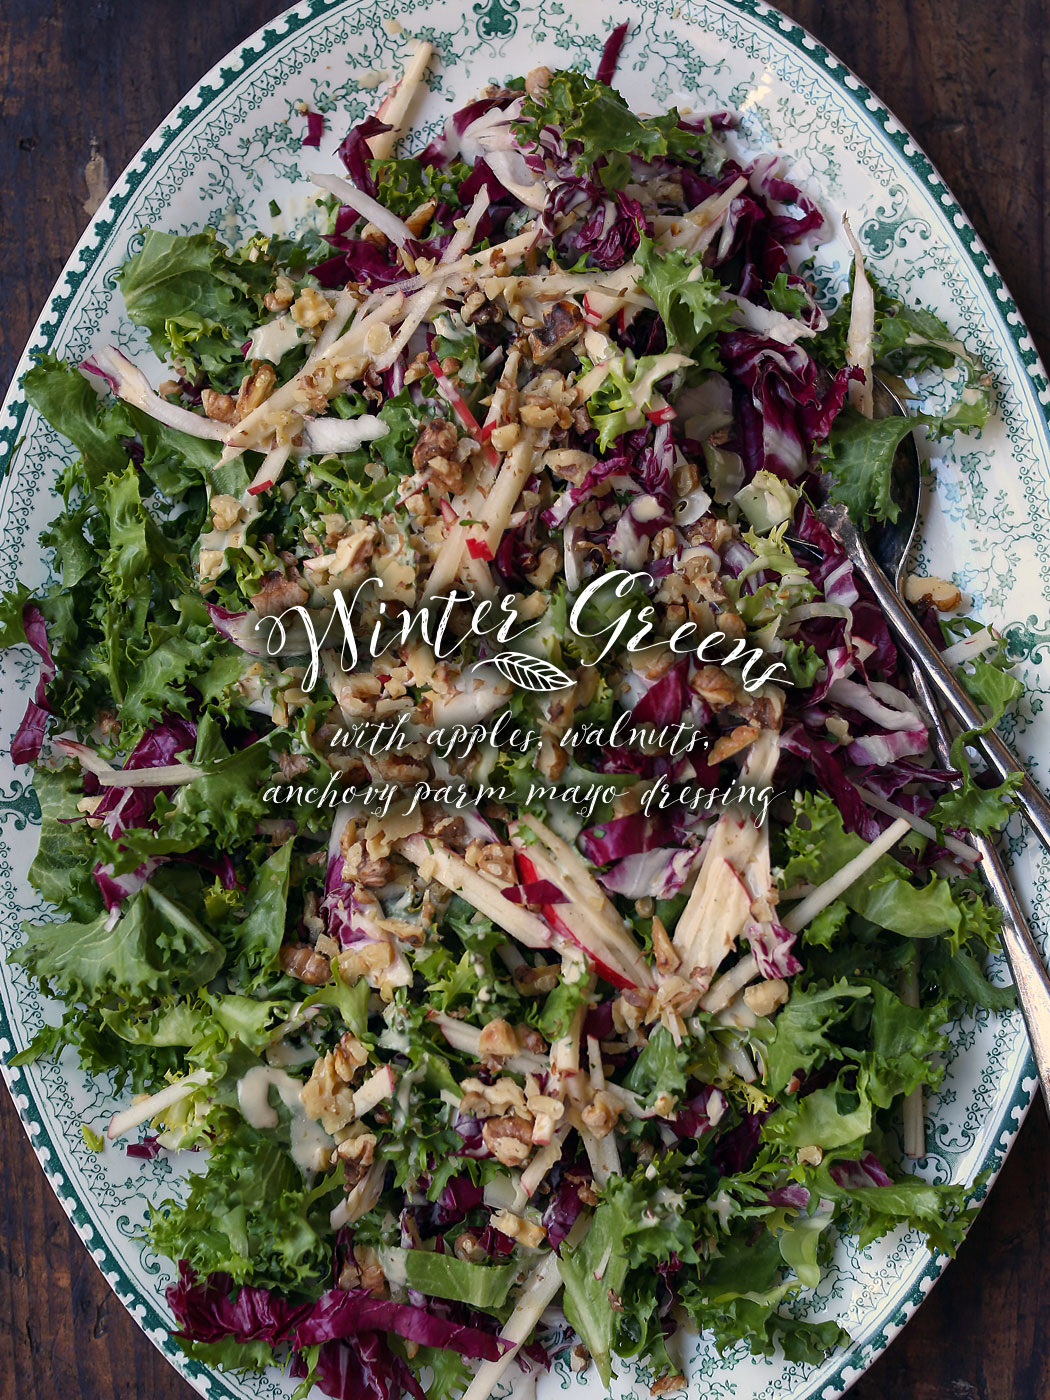 Winter Greens with Apple Walnut Anchovy Parm Mayo Dressing